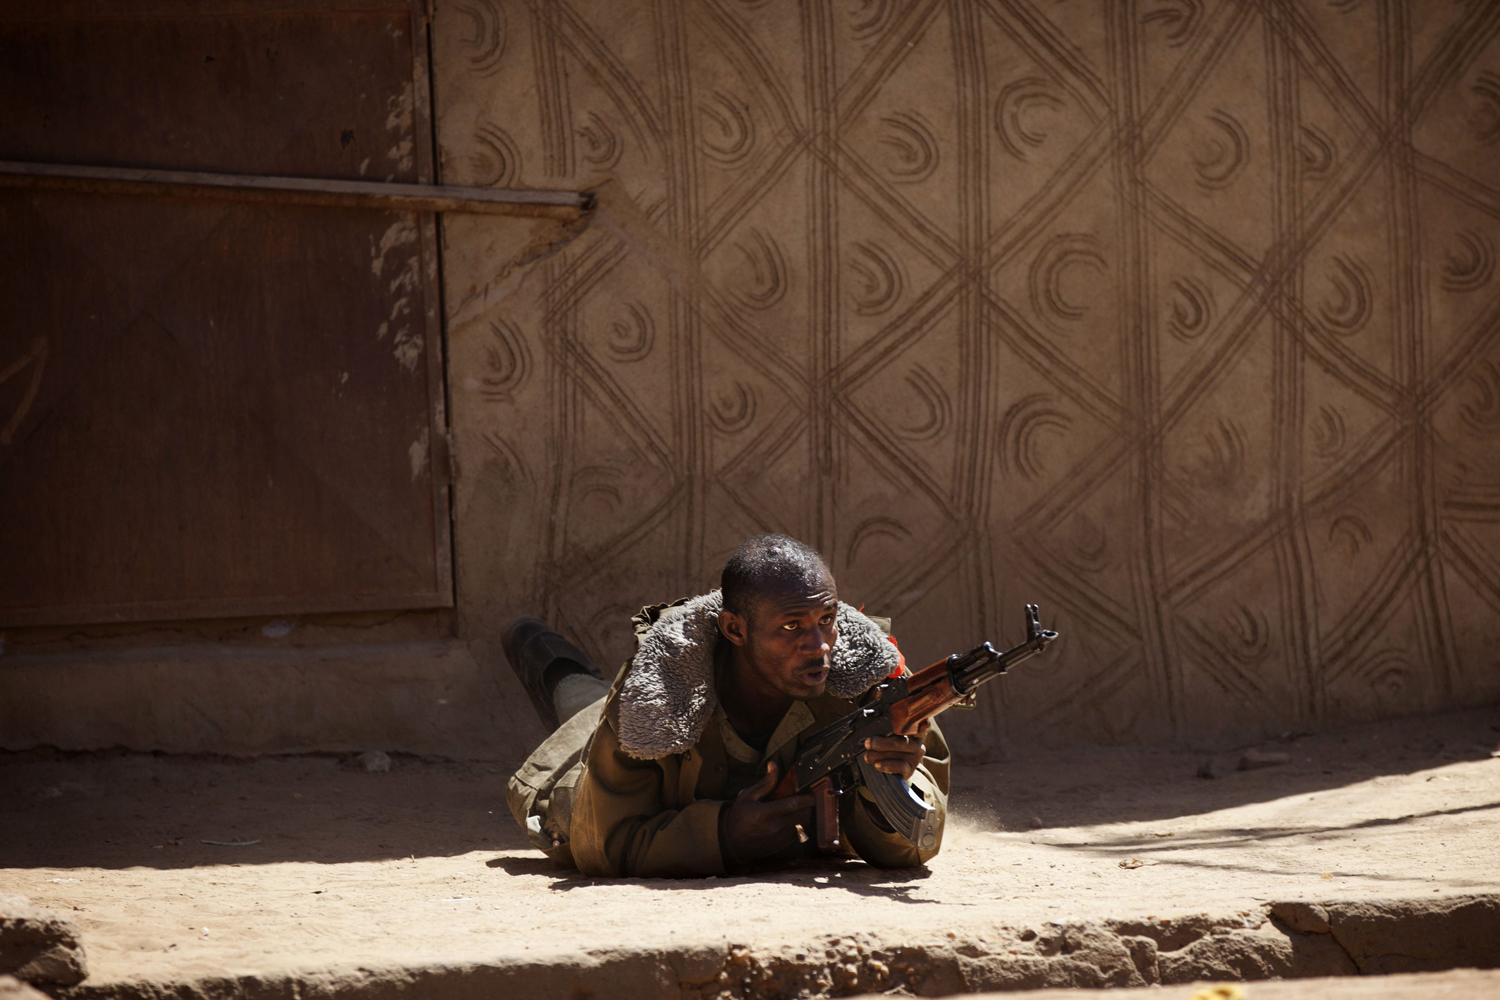 A Malian soldier fires an AK-47 during fighting with Islamists in Gao